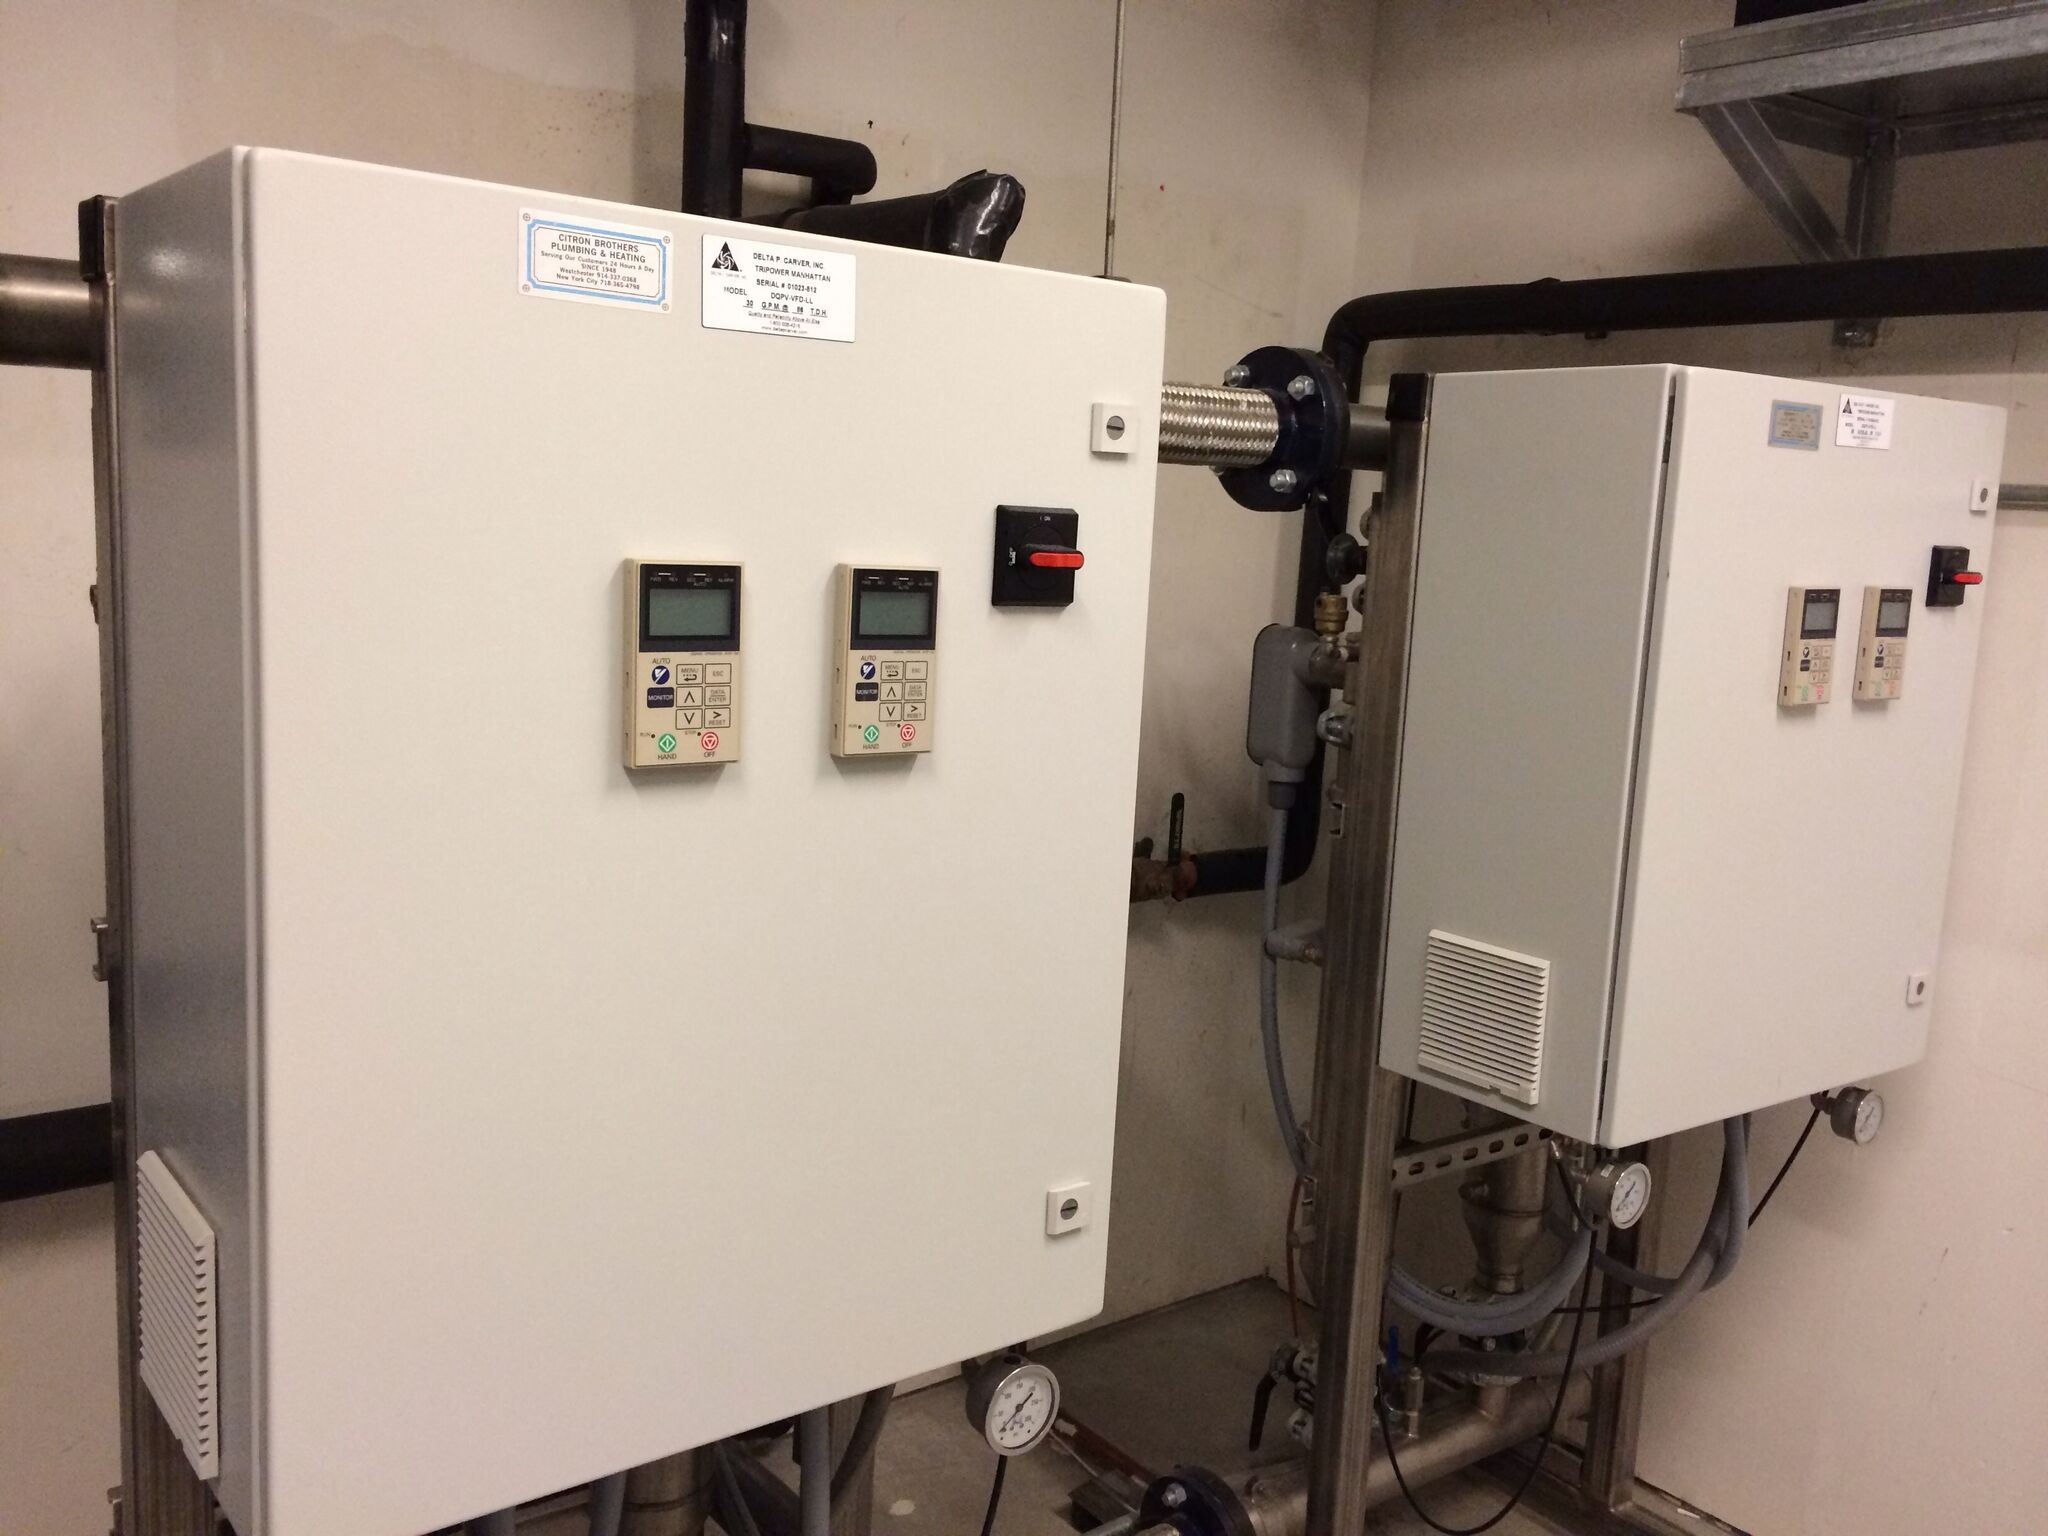 Electrical panel with modbus integration to control and monitor domestic water pressure in New York City